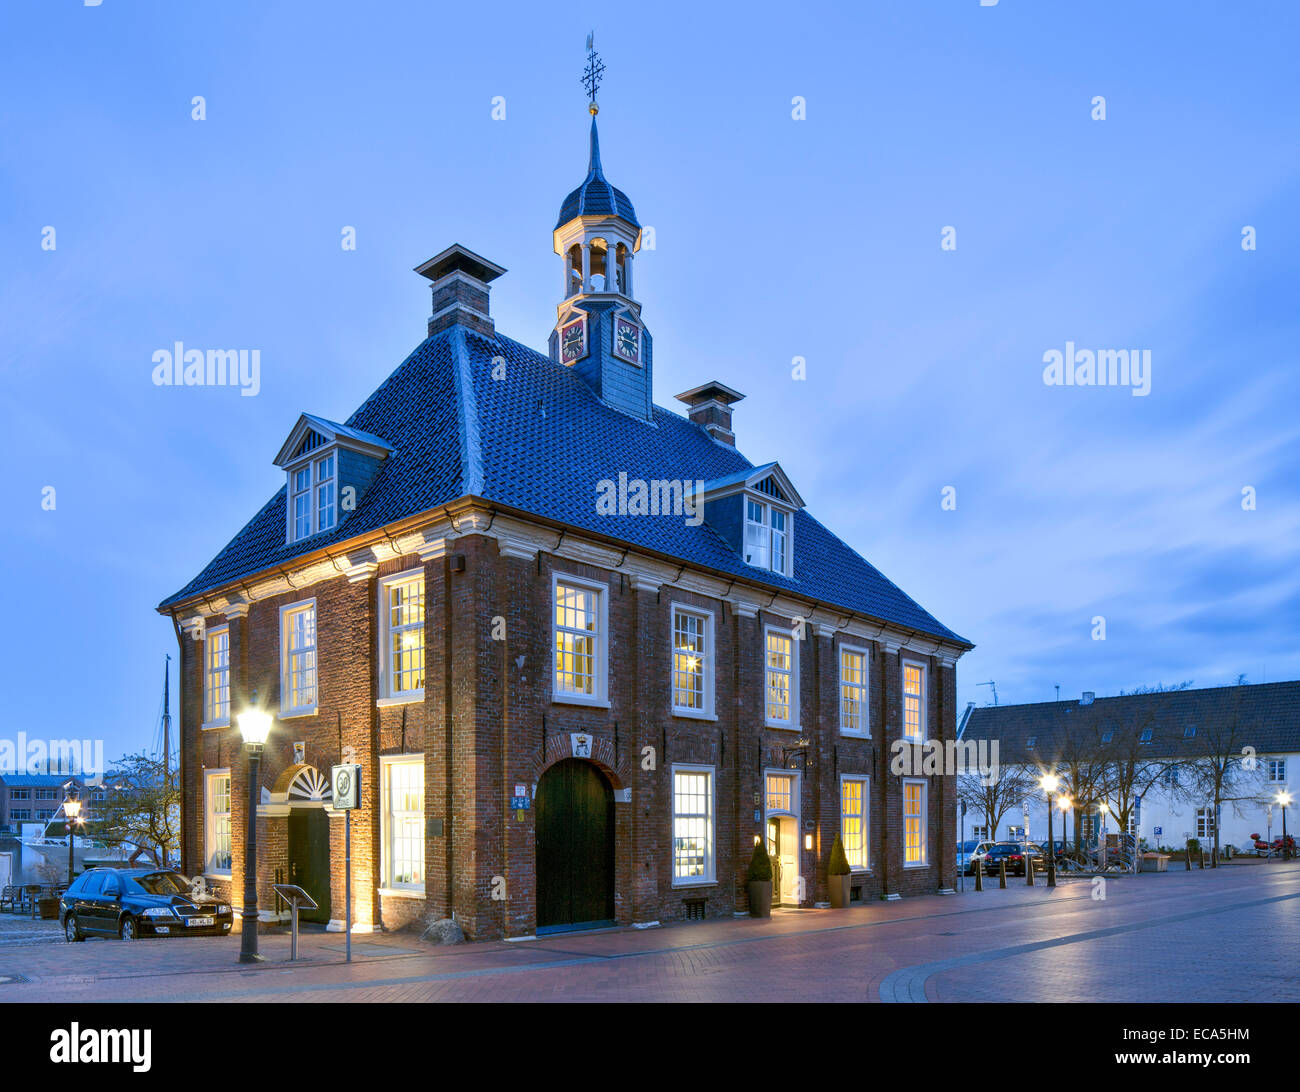 Alte Waage scale house on the harbor, Leer, East Frisia, Lower Saxony, Germany Stock Photo